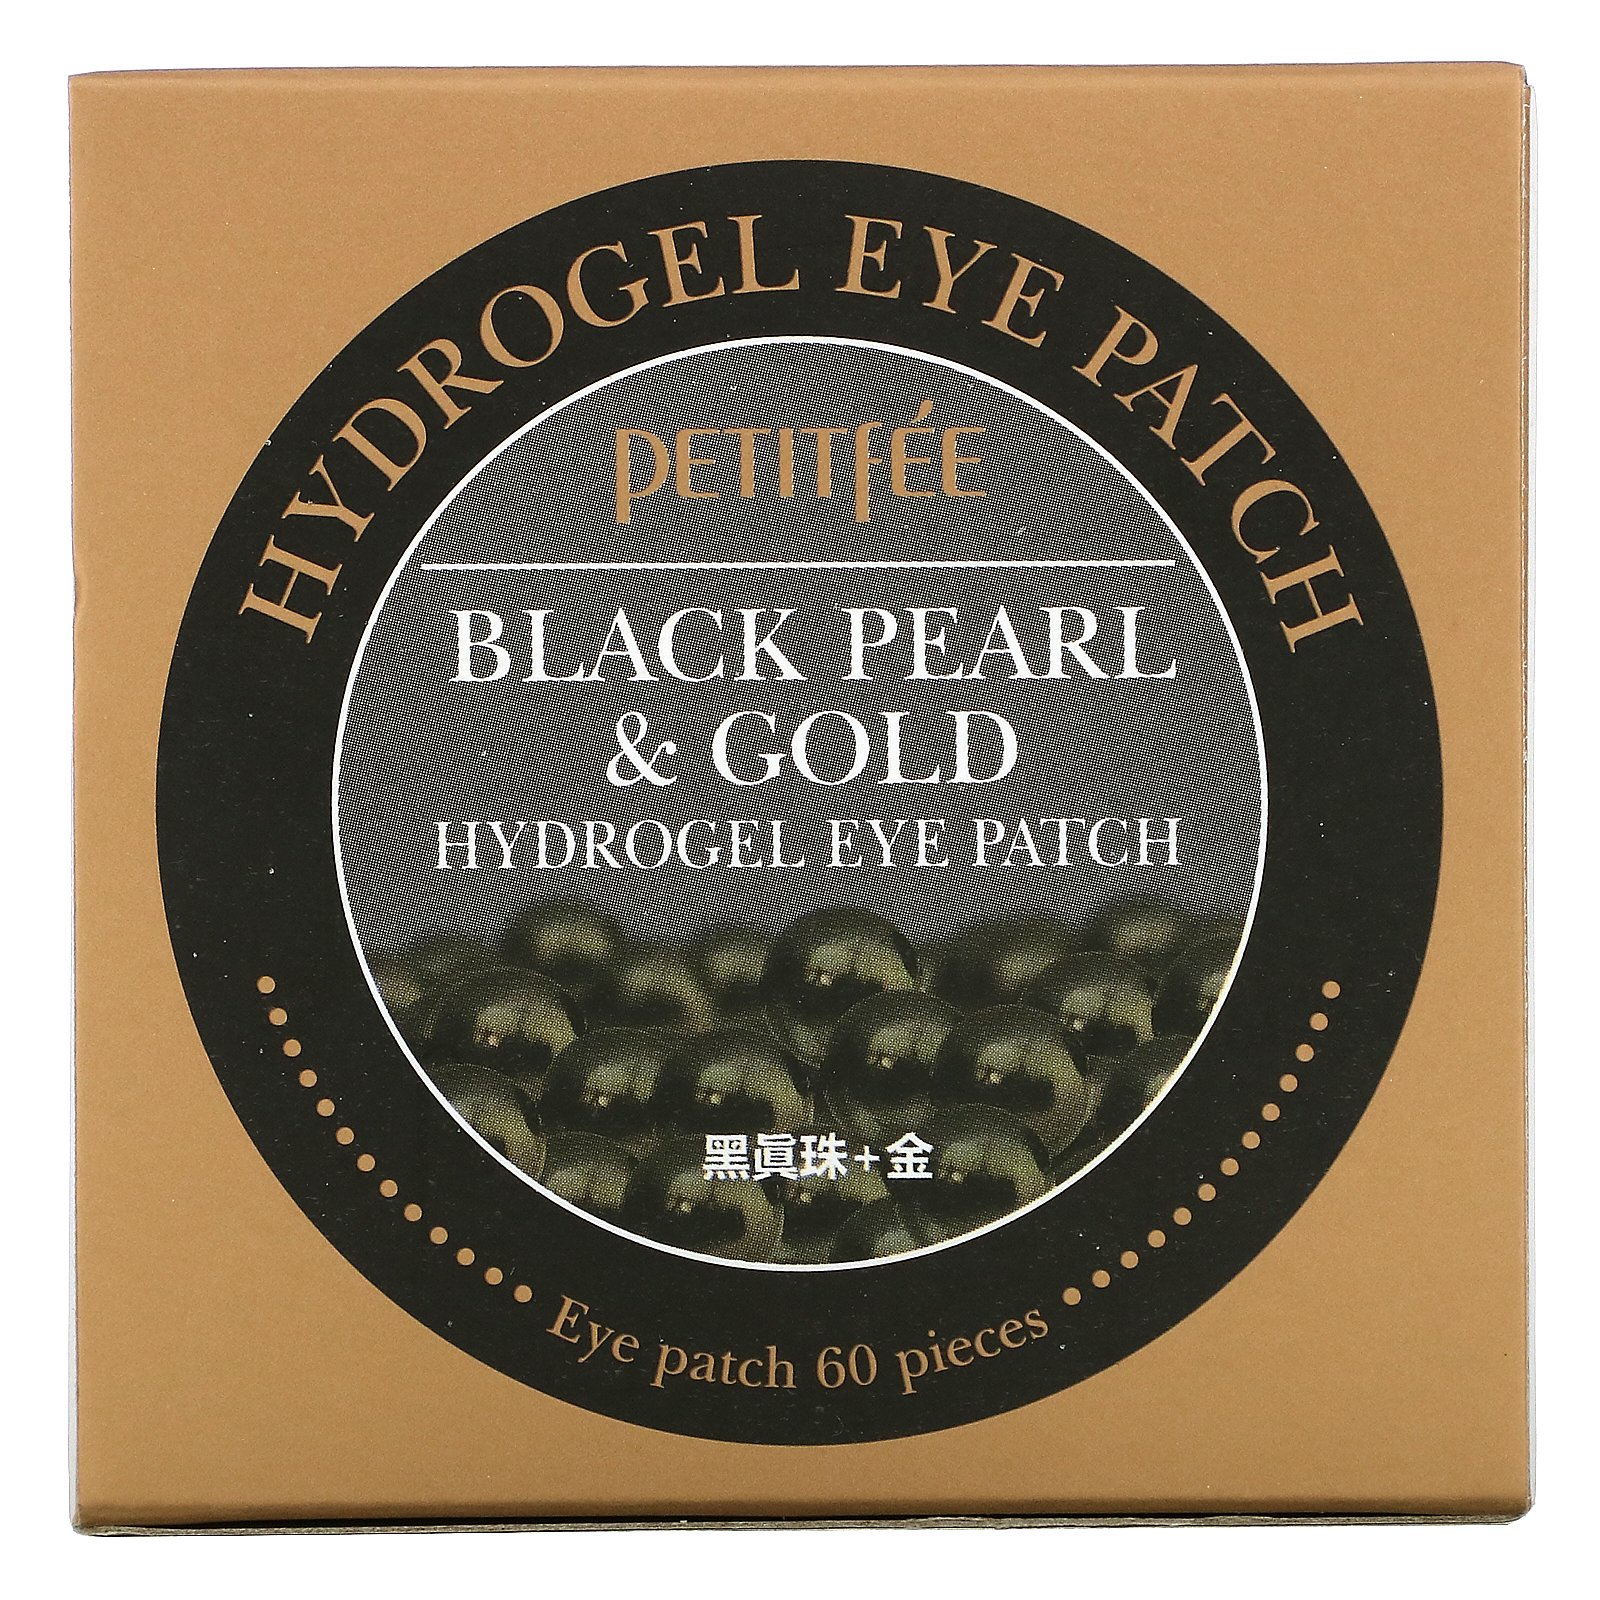 Petitfee Black Pearl & Gold Hydrogel Eye Patch, 60 Patches - image 2 of 4